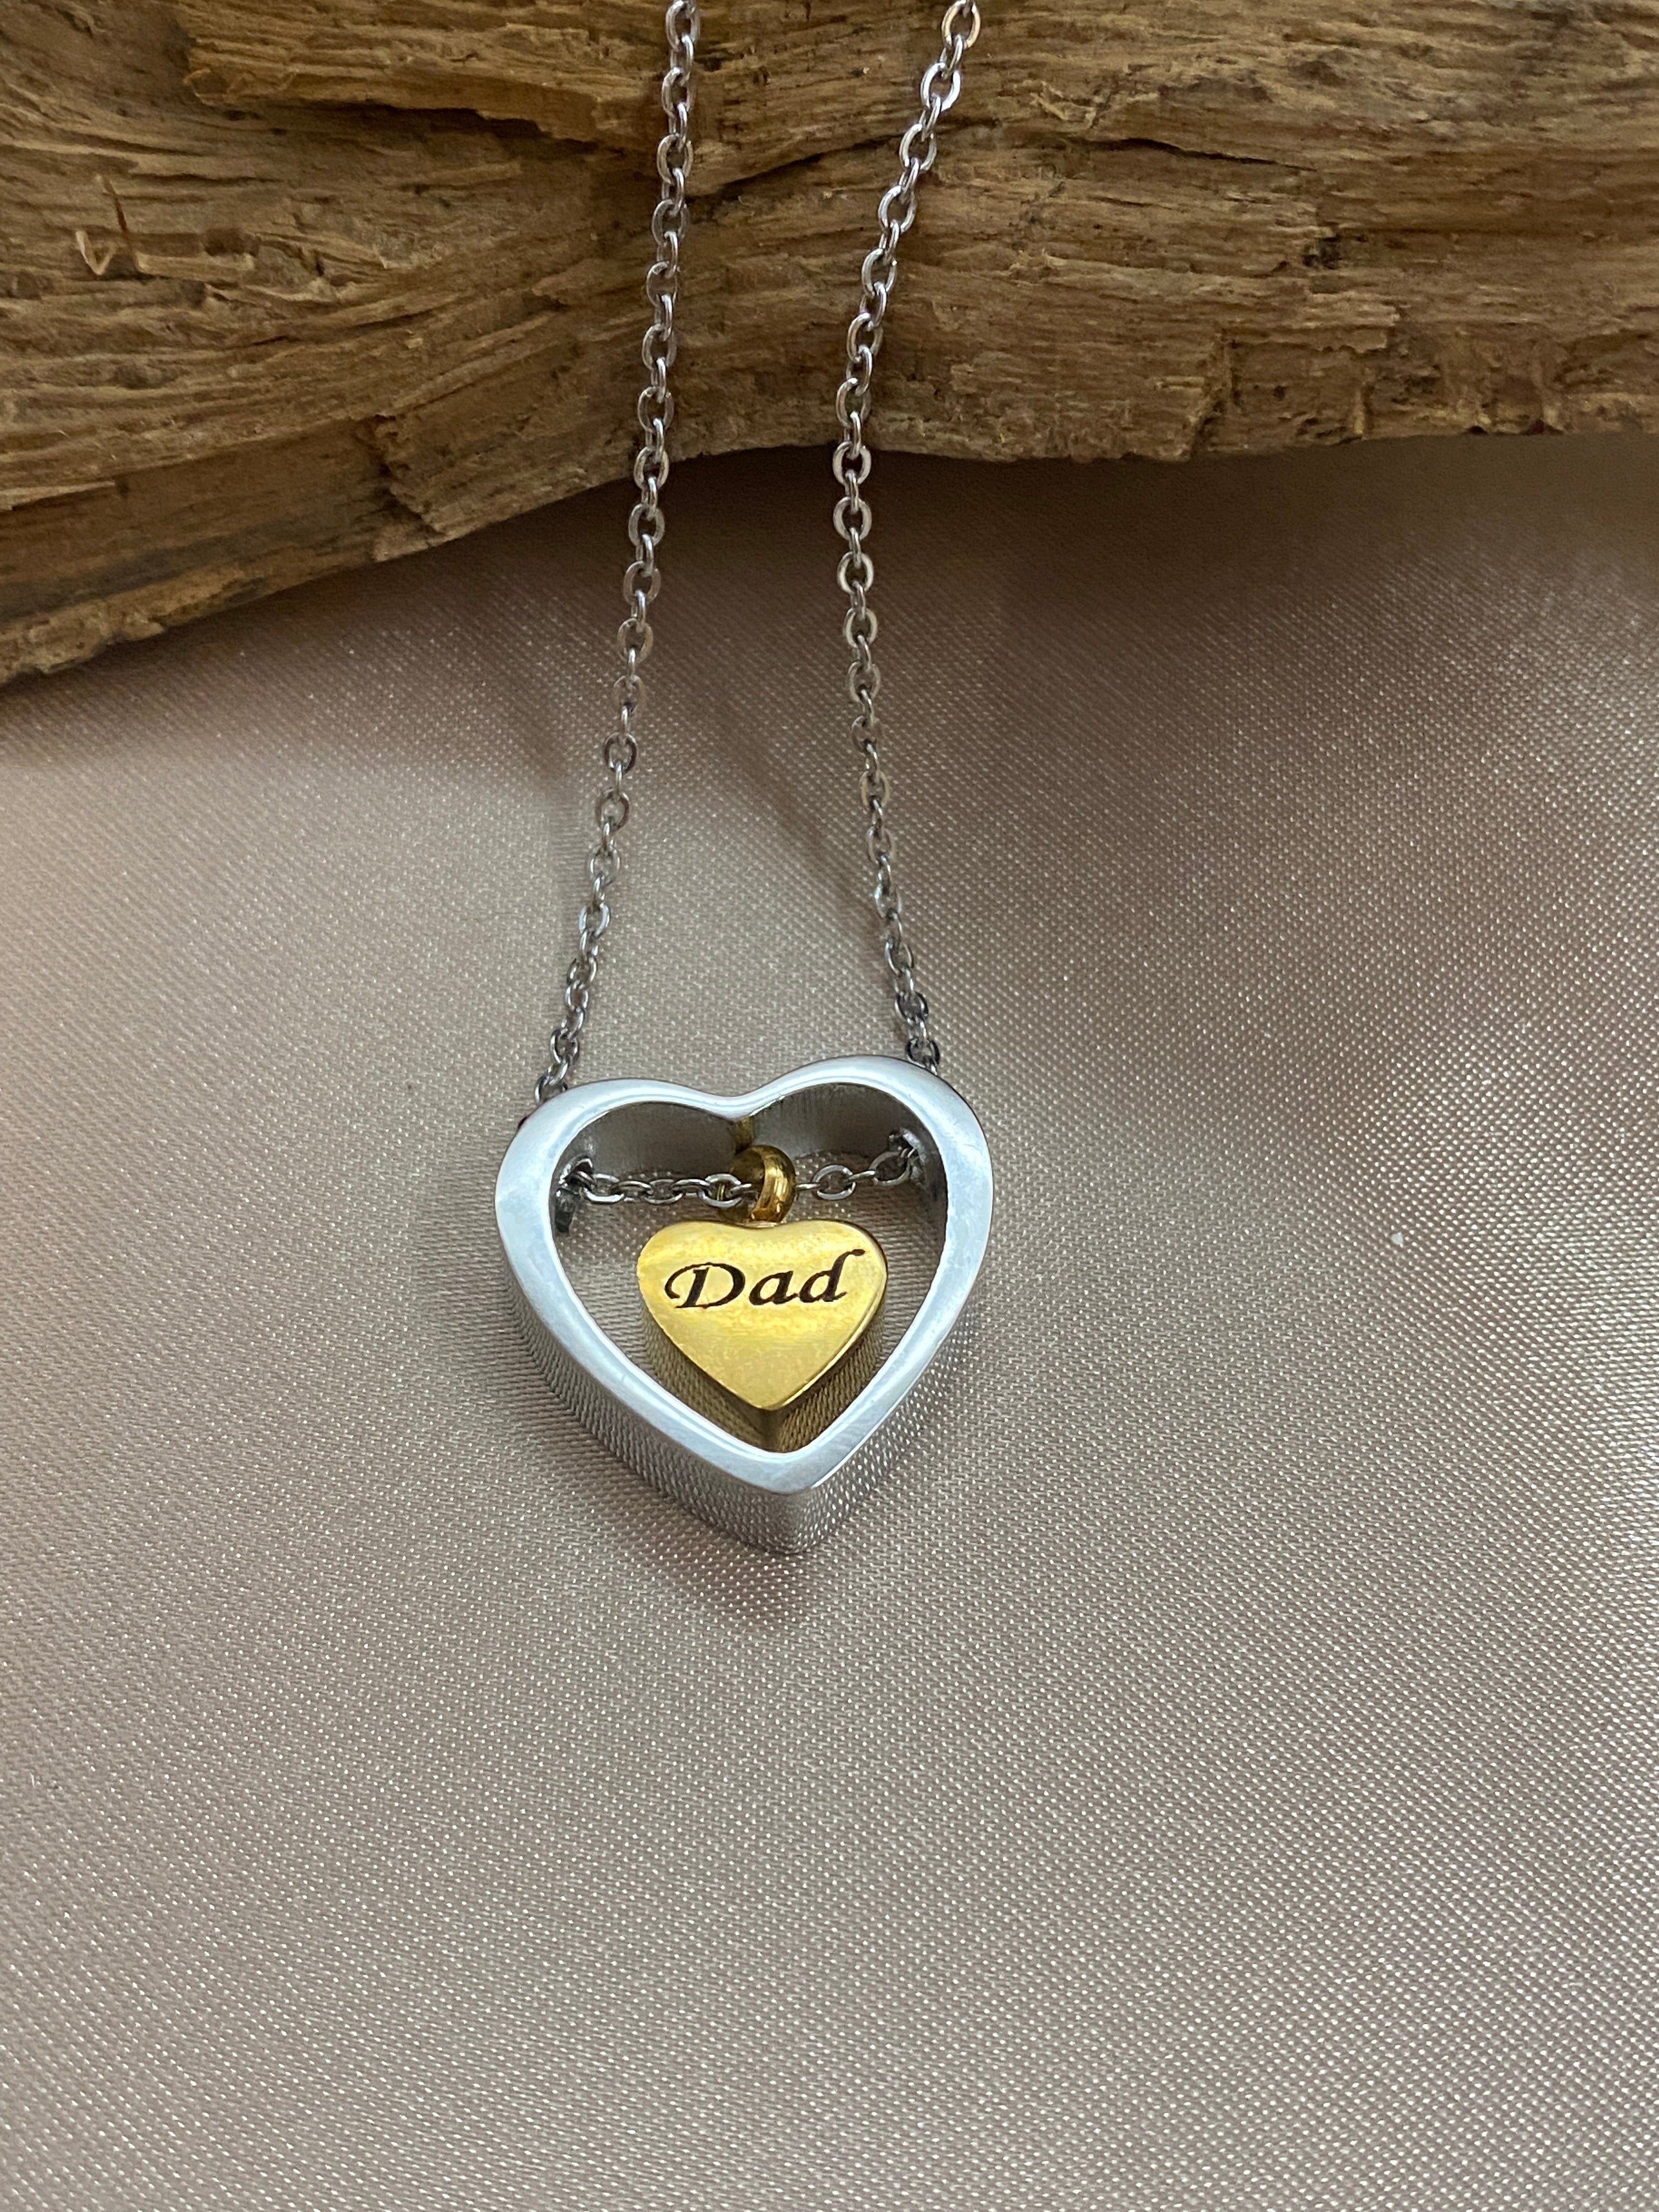 Personalized Custom Photo Text Engraving Dog tags Stainless Steel Necklace Memorial  Necklace in Dubai - UAE | Whizz Pendant Necklaces